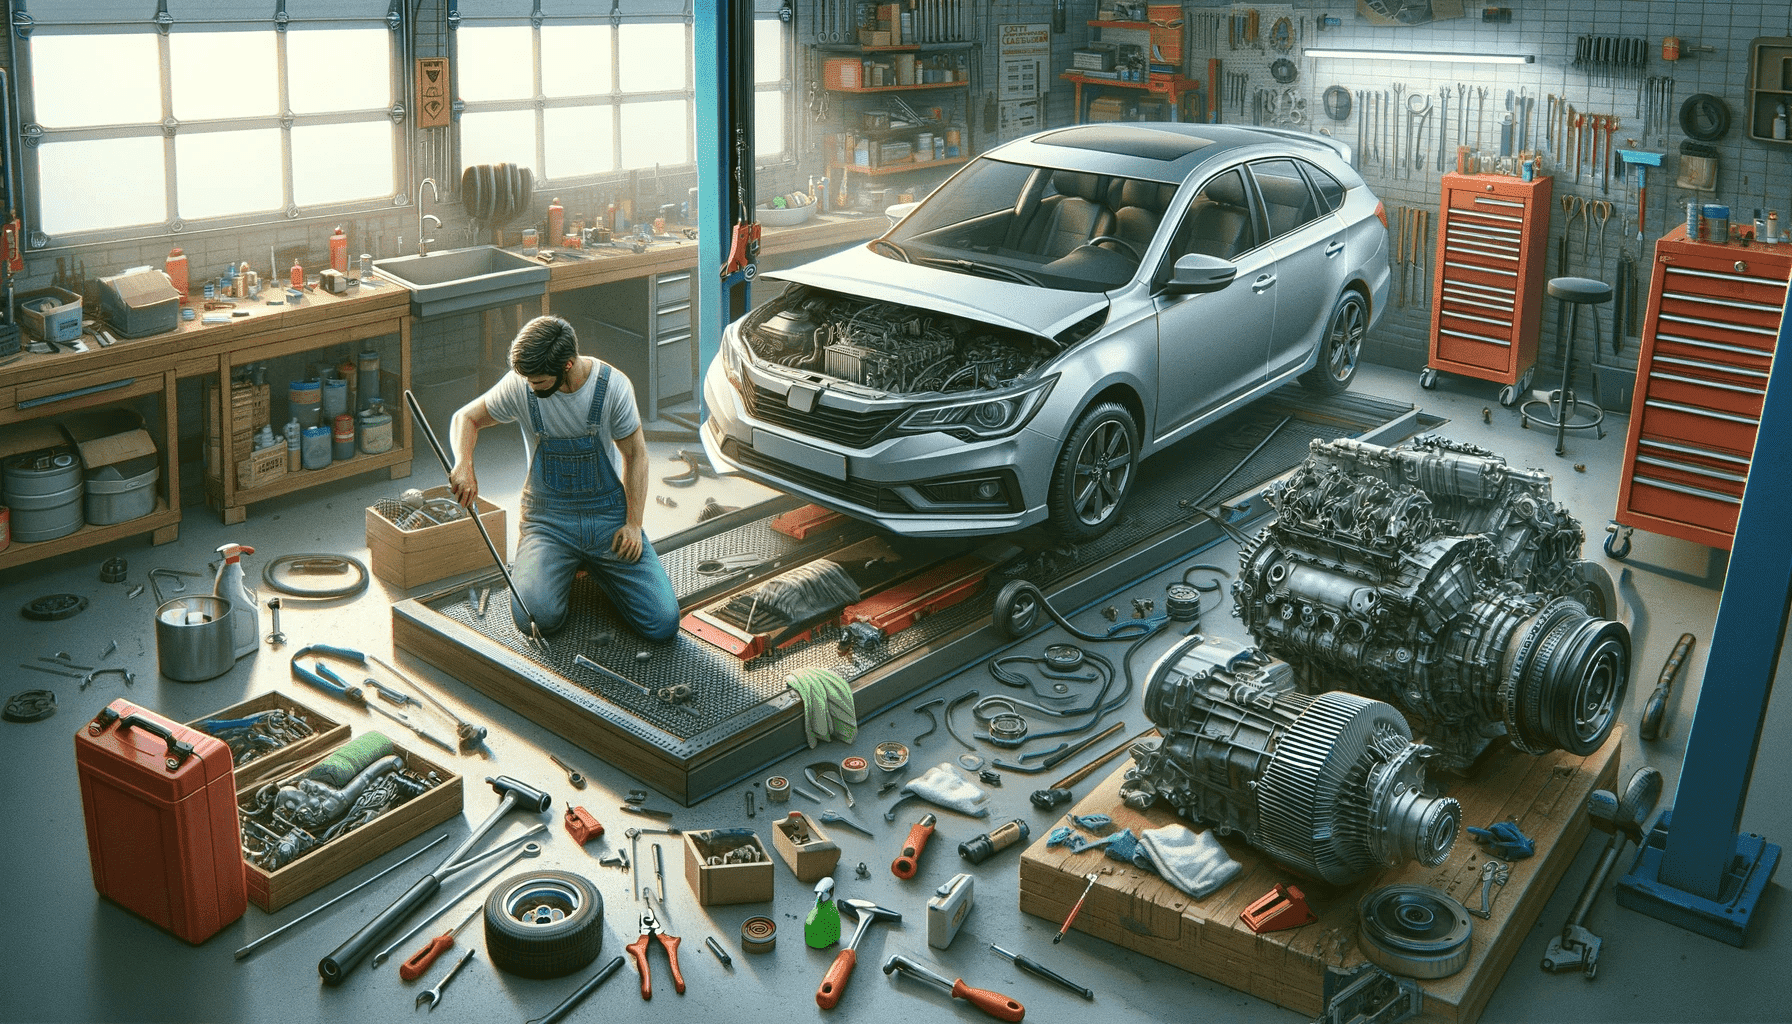 DIY Auto Repair: 10 Common Mistakes and How to Avoid Them